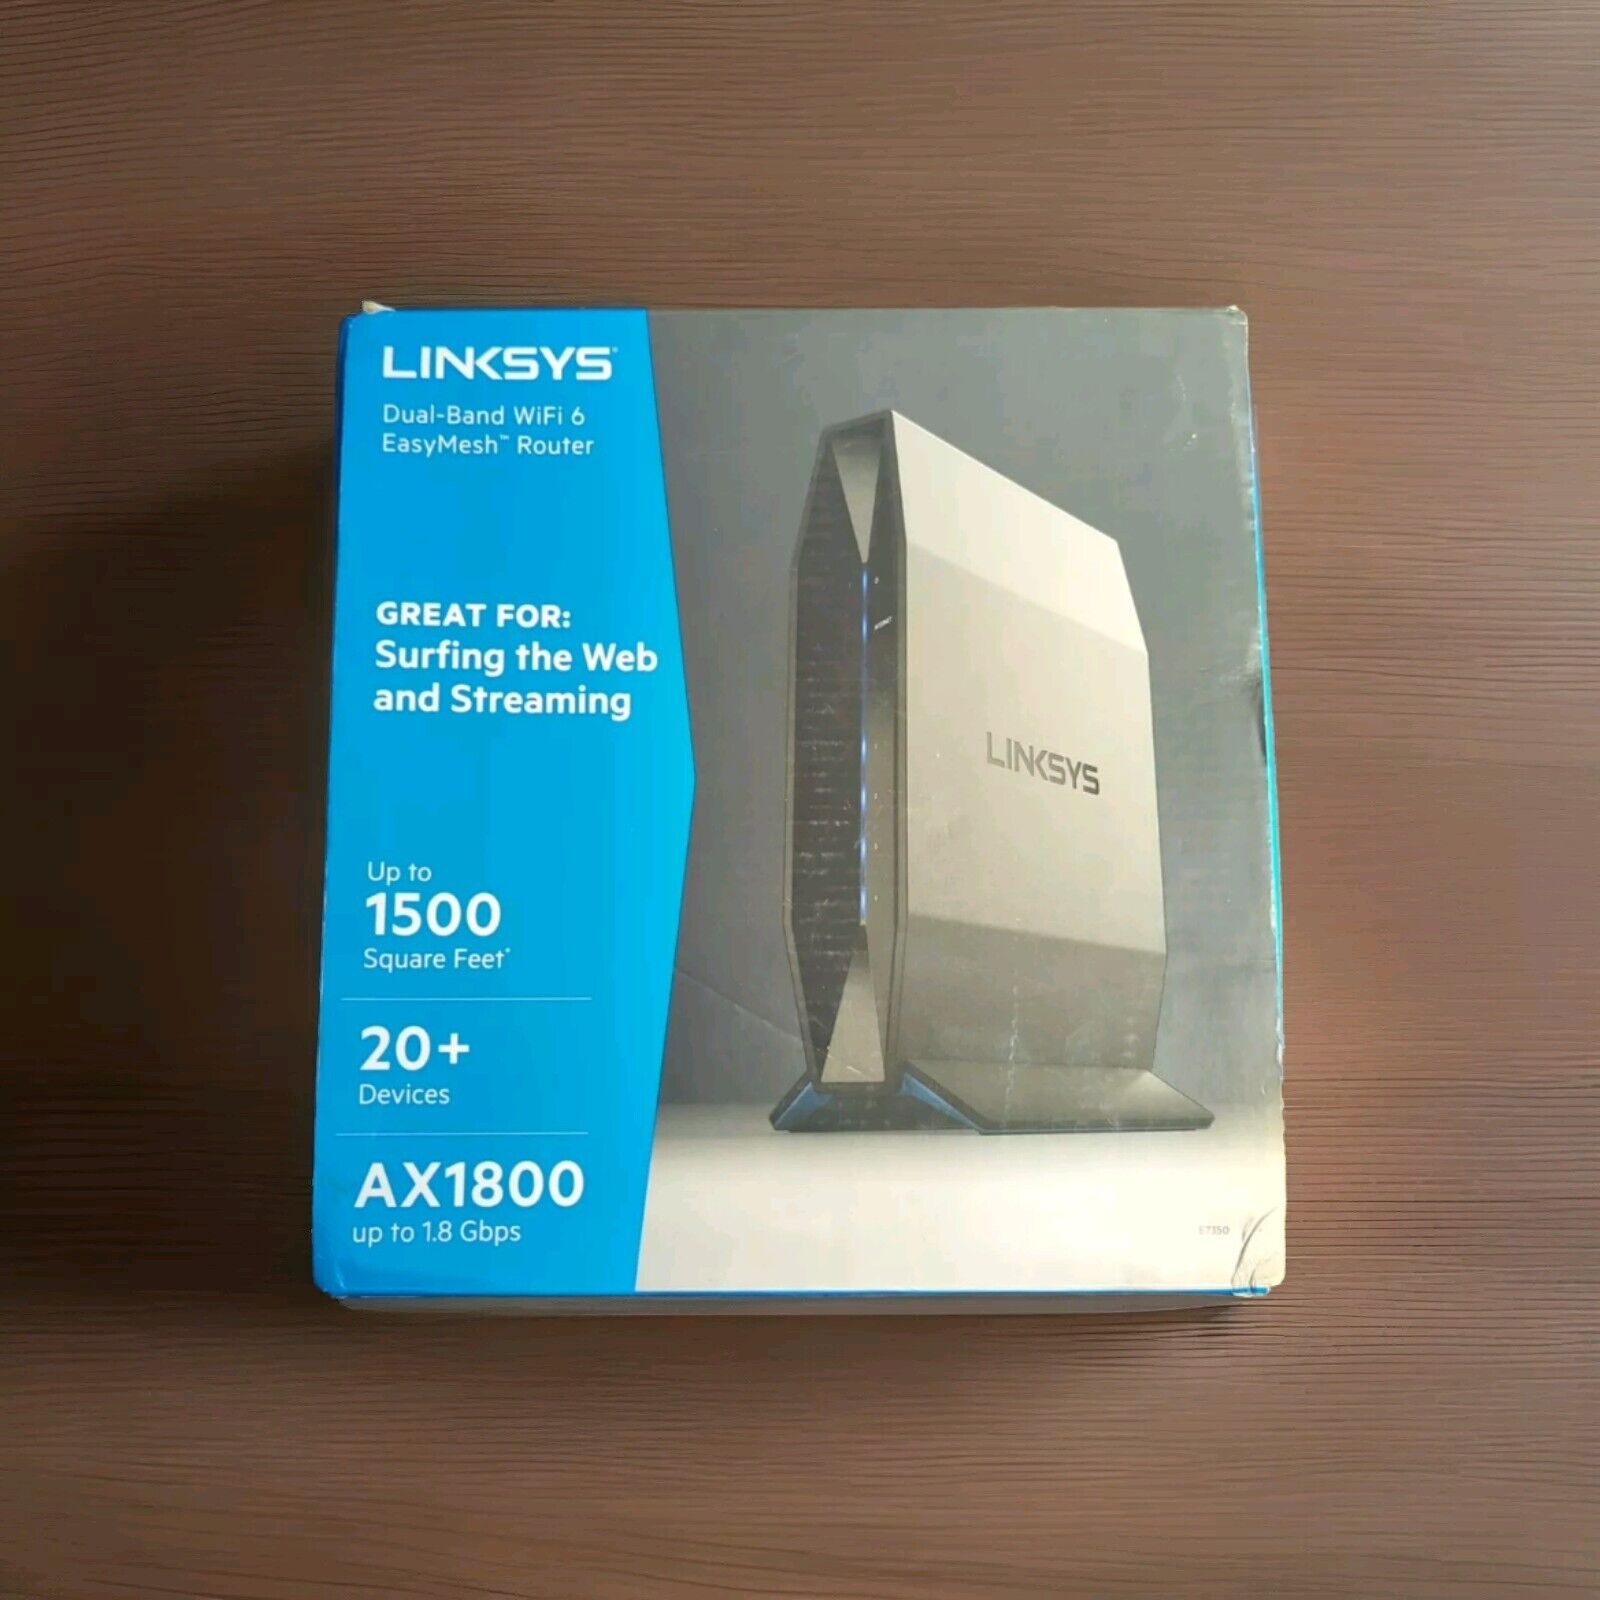 Linksys E8450 Dual-Band Wi-Fi 6 Router AX3200 3.2 Gbps 2500 sq ft, 25 Devices